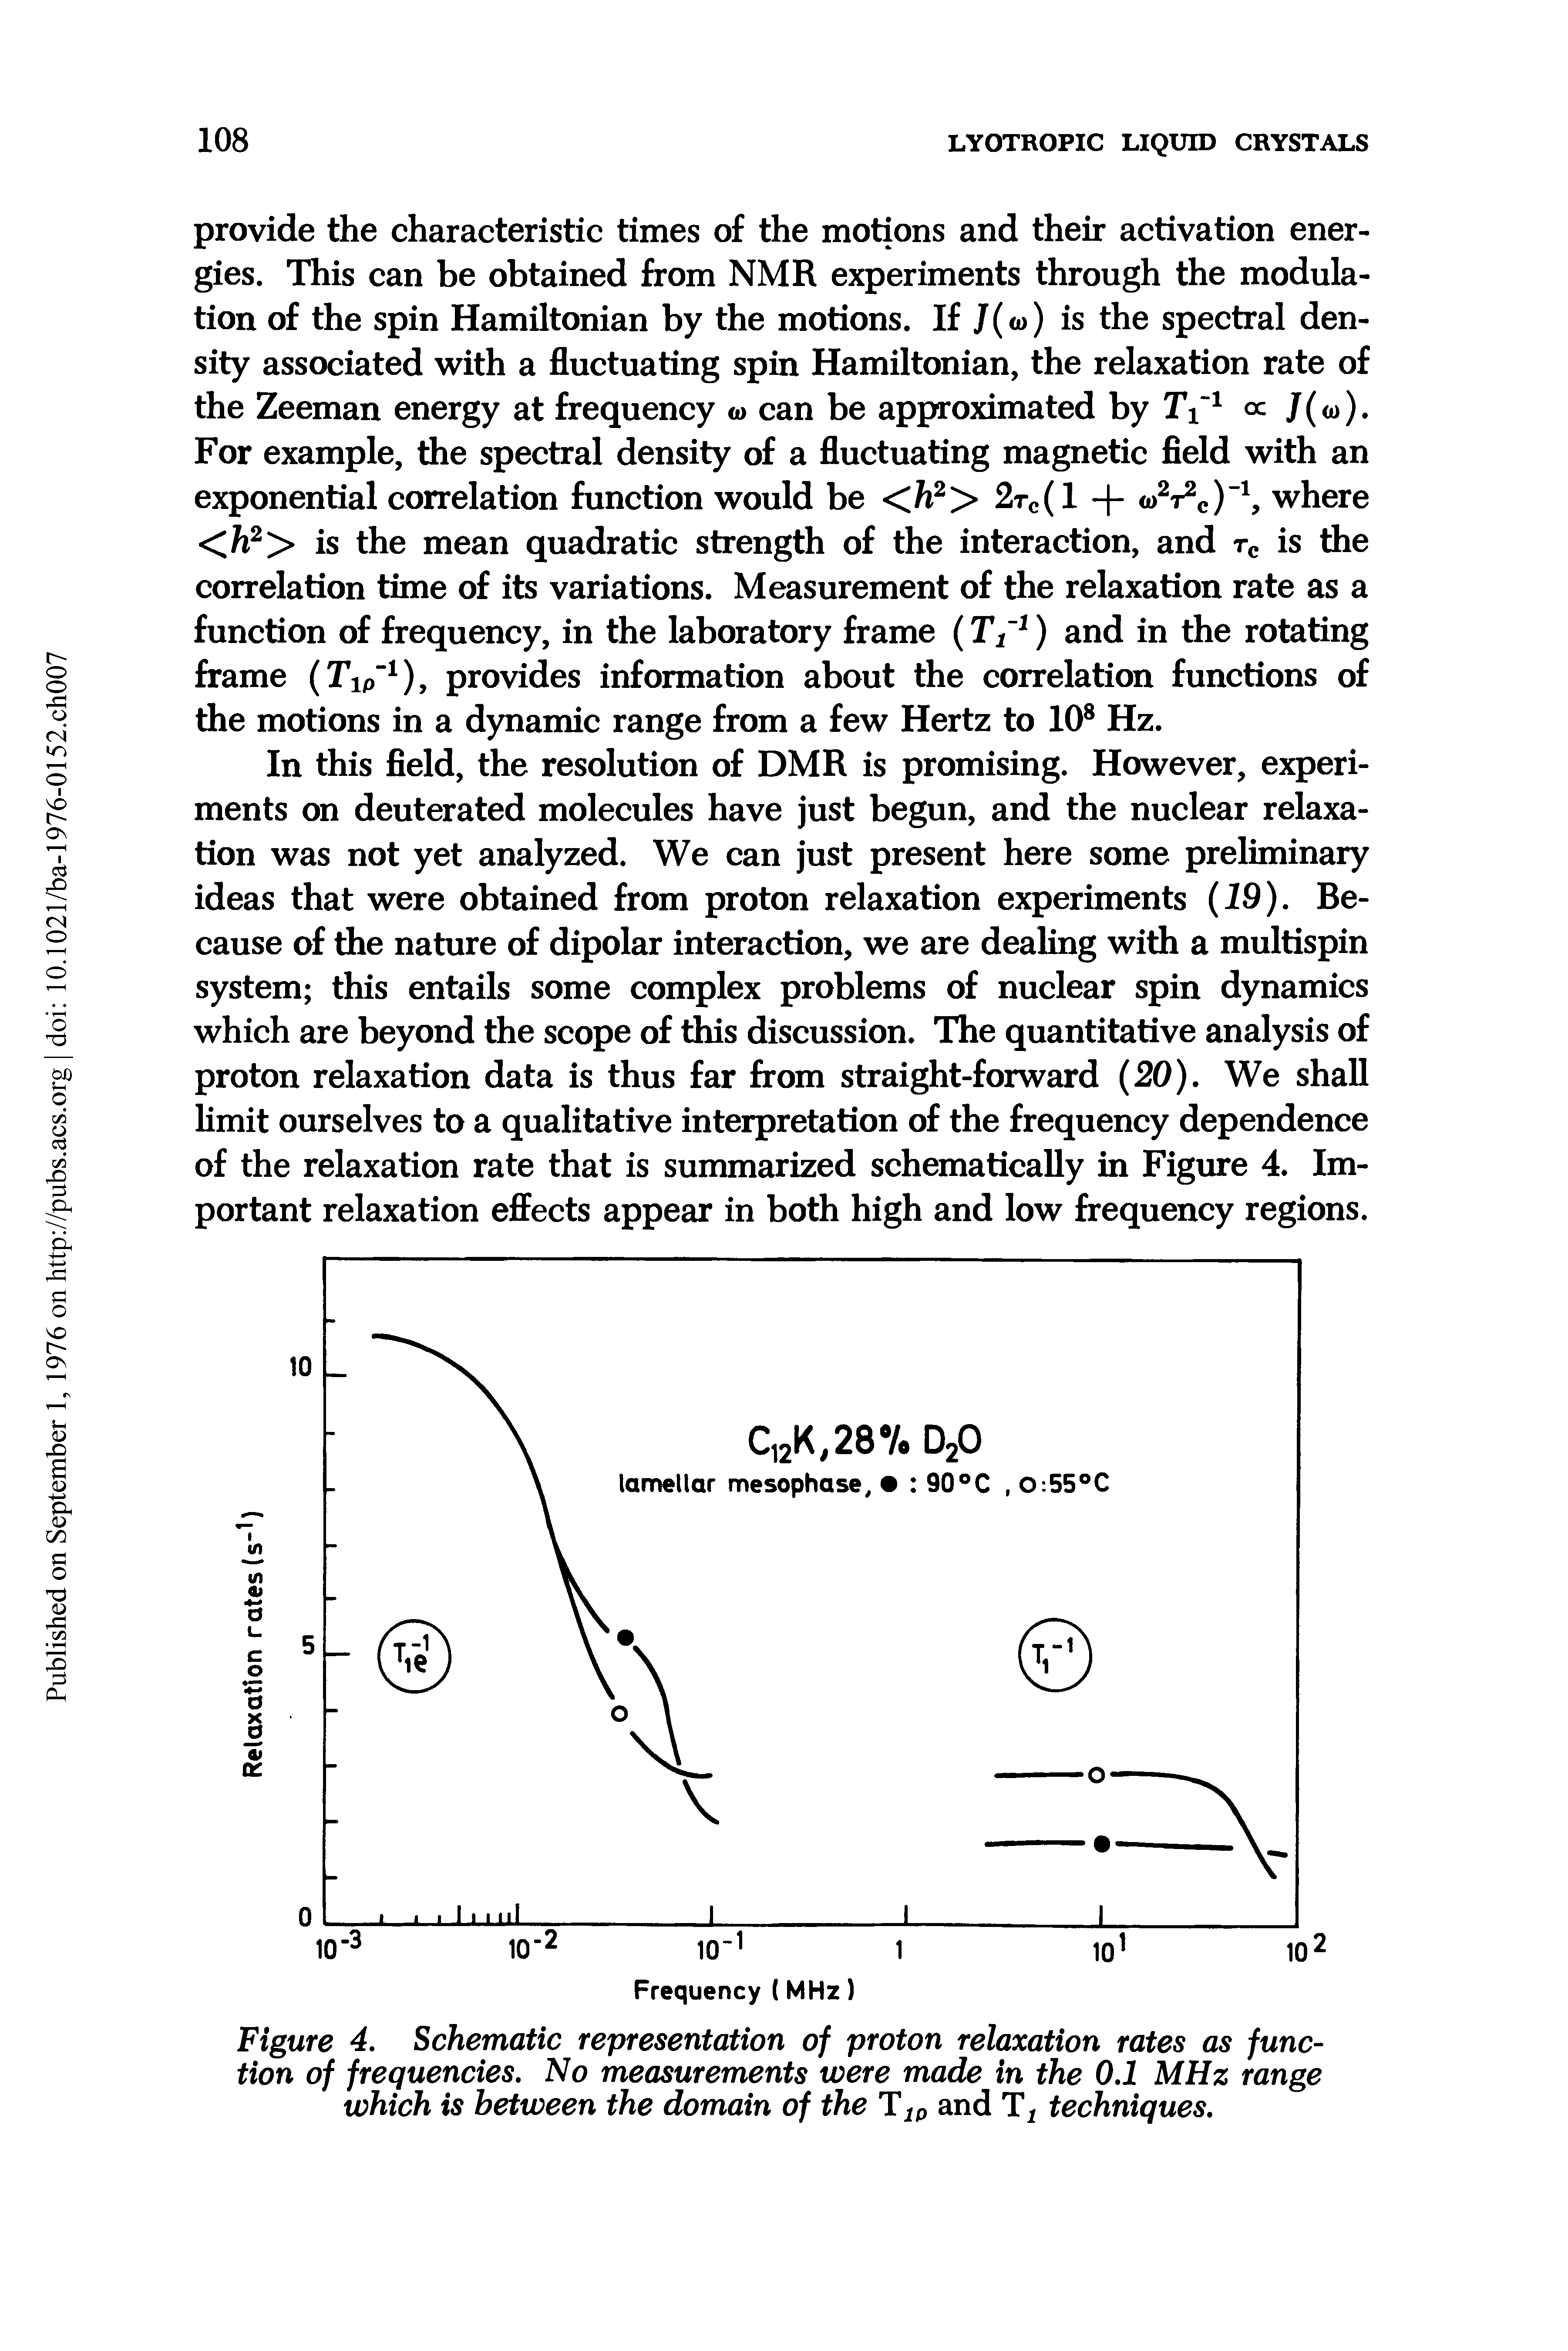 Figure 4. Schematic representation of proton relaxation rates as function of frequencies. No measurements were made in the 0.1 MHz range which is between the domain of the Tlp and Tt techniques.